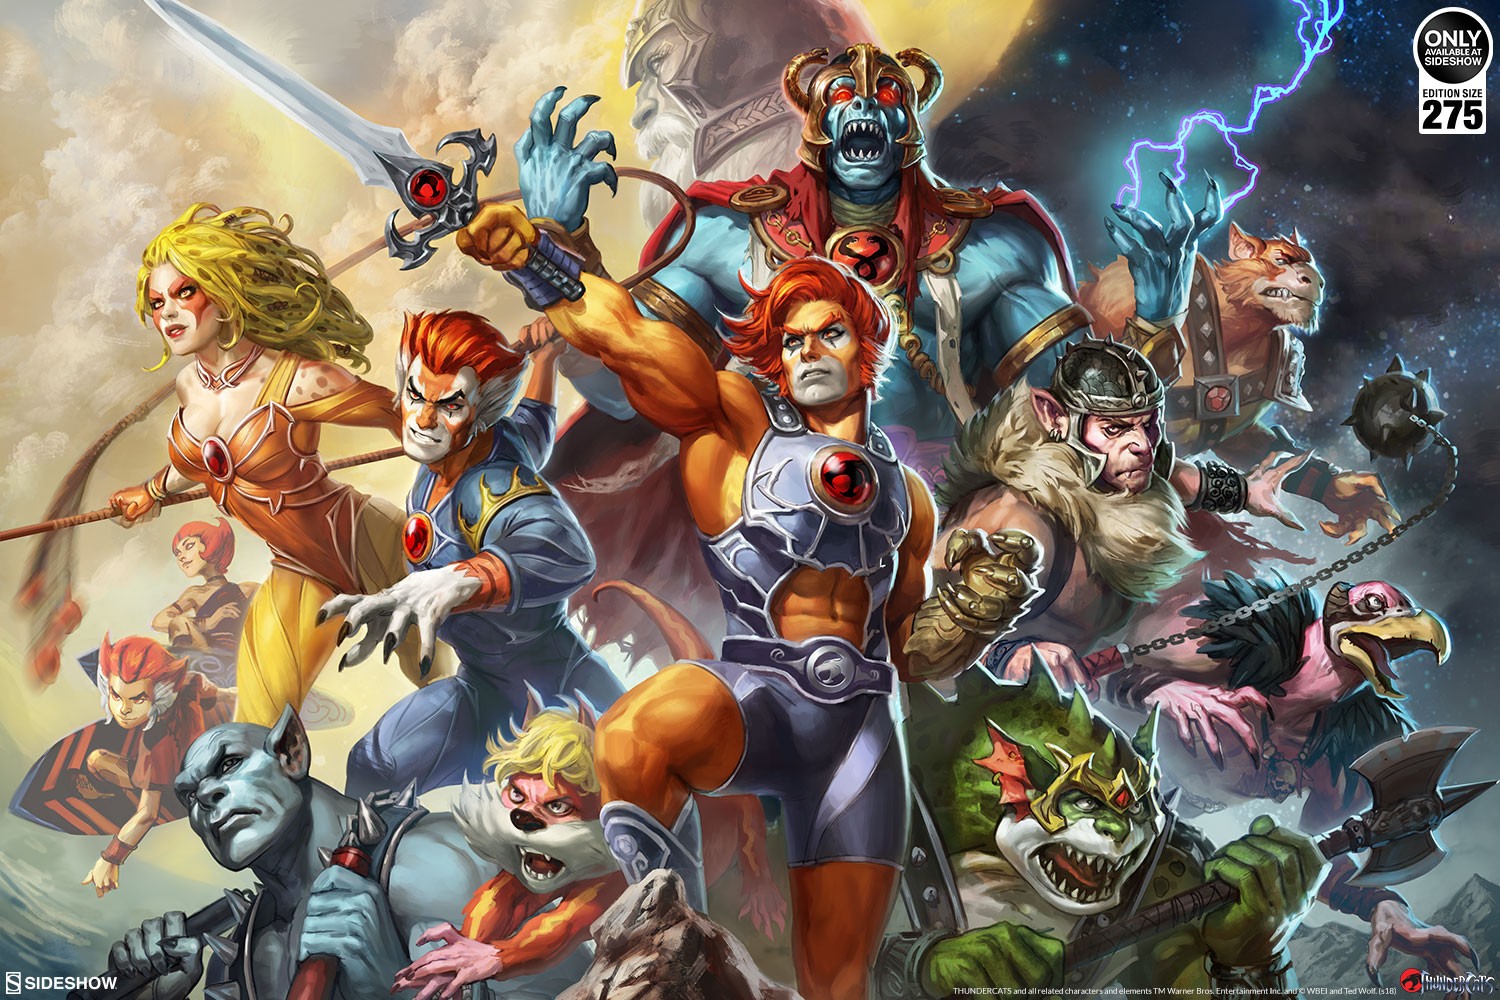 ThunderCats Exclusive Edition View 3